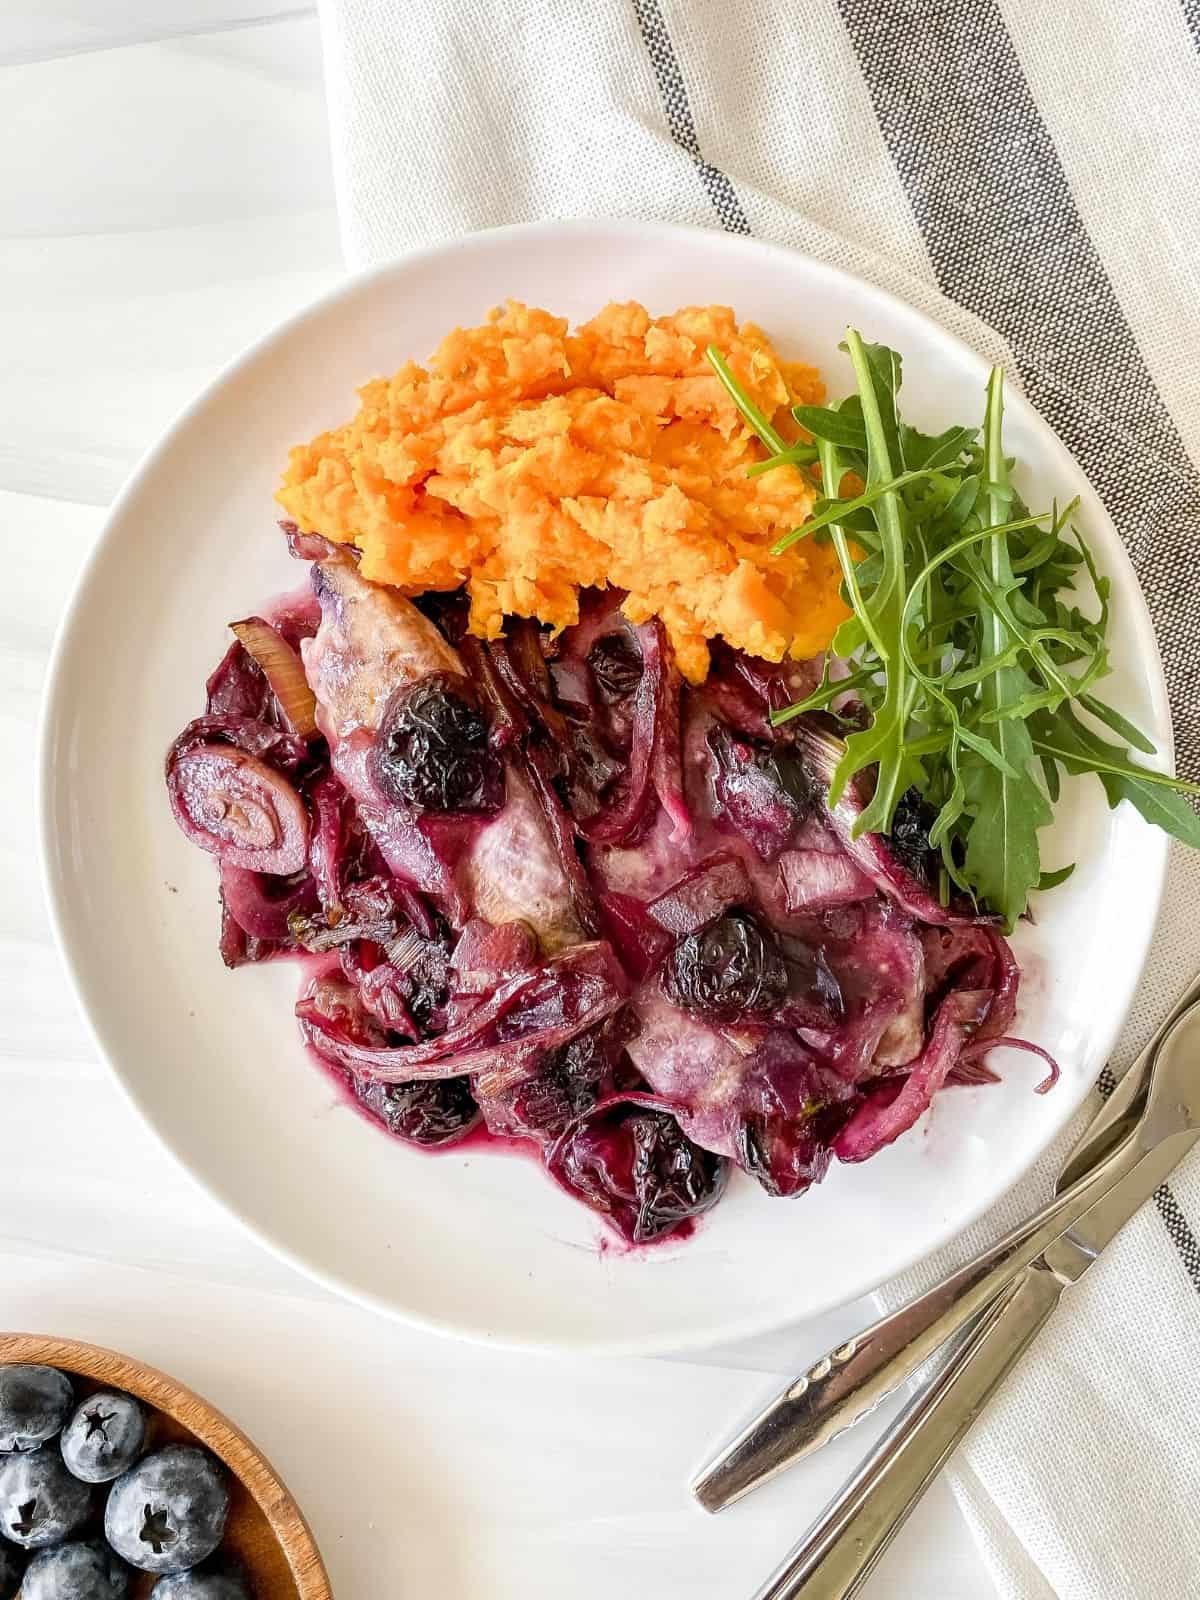 blueberry chicken, sweet potato mash and arugula on a white plate next to a brown plate of blueberries.